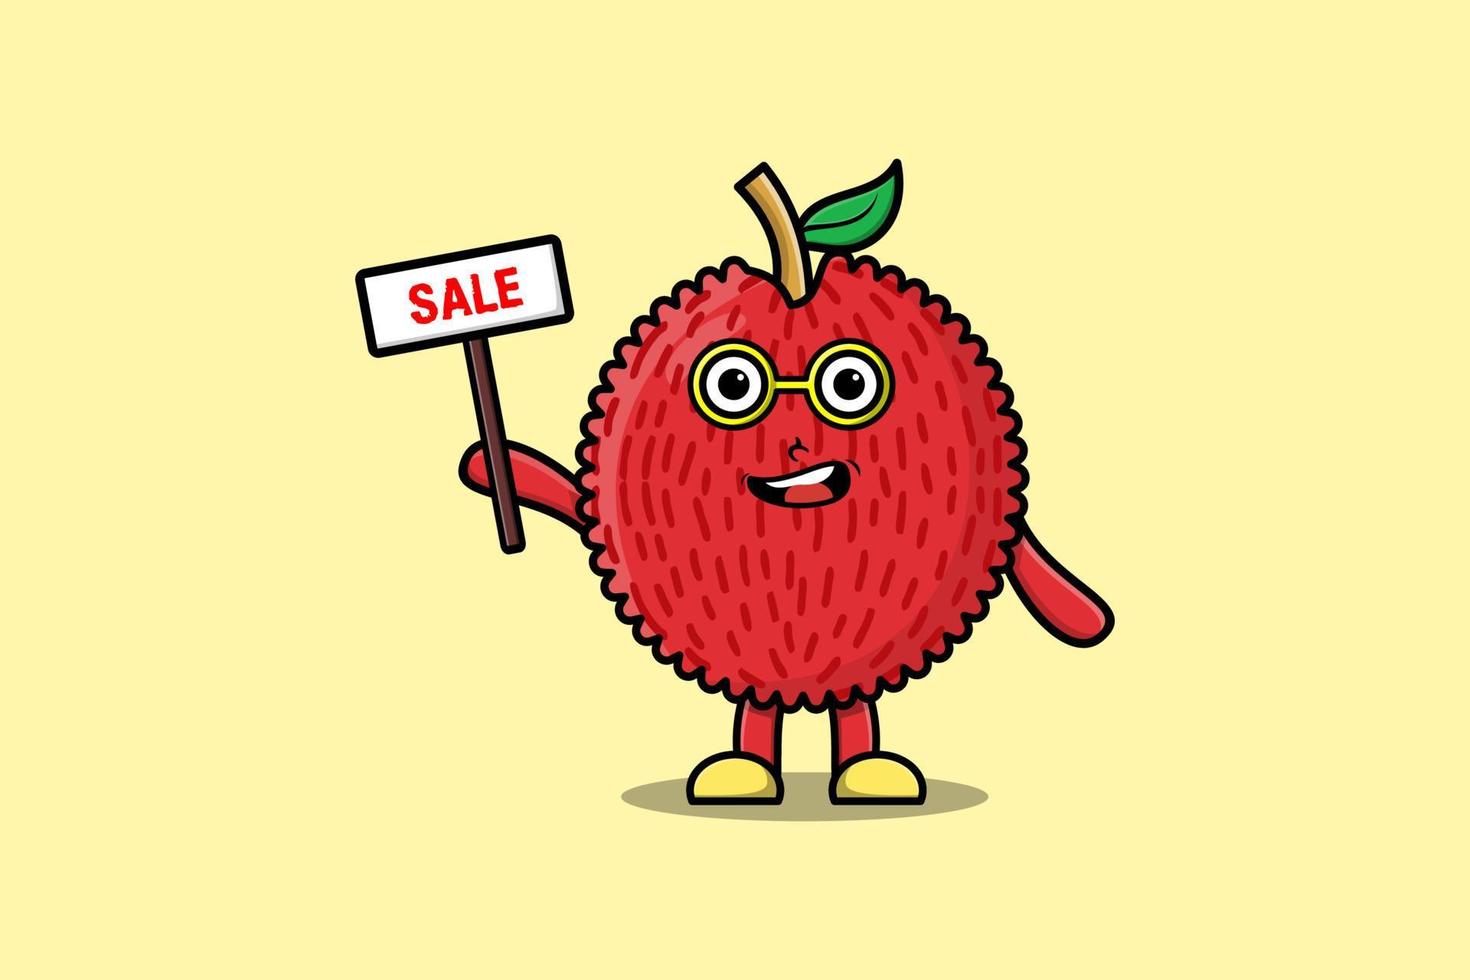 Cute cartoon Lychee character holding sale sign vector